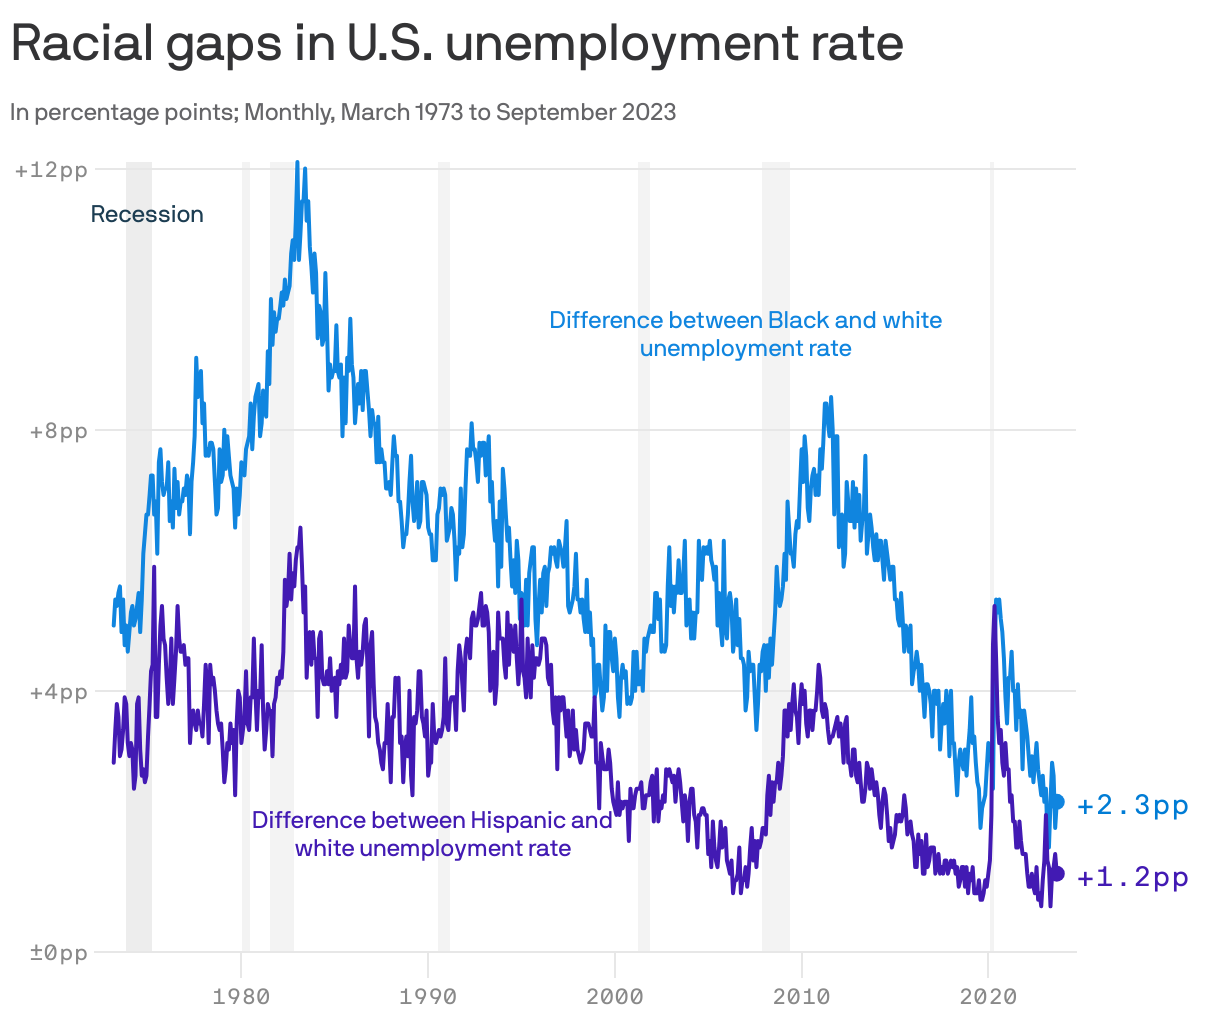 Racial gaps in U.S. unemployment rate